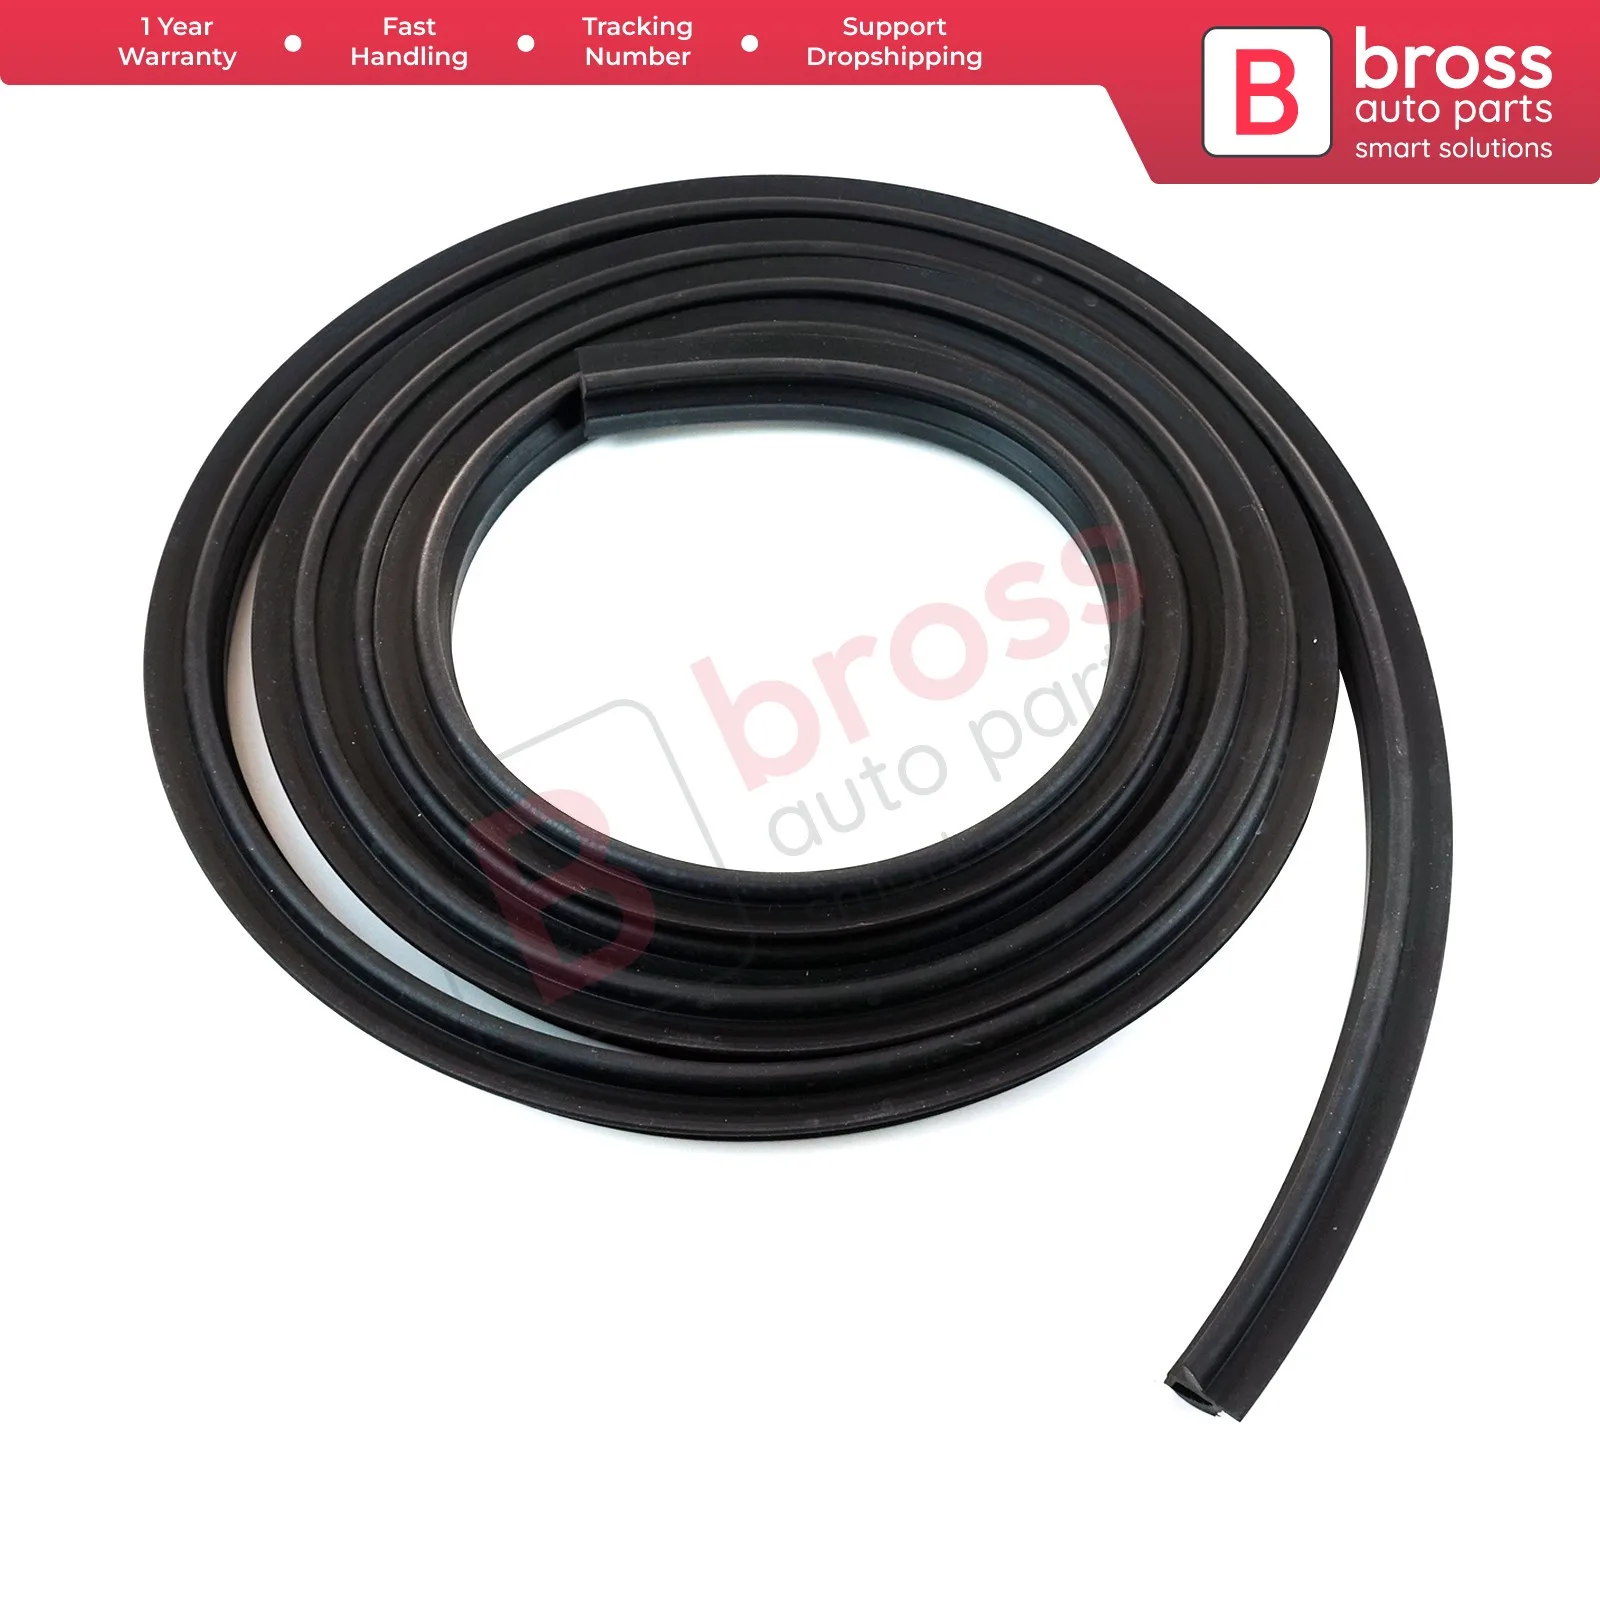 

For Renault Clio MK2 Campus 7701045038 Bross Auto BSR604 Manual Electric Sunroof Rubber Seal Gasket Weatherstrip Lenght:250cm